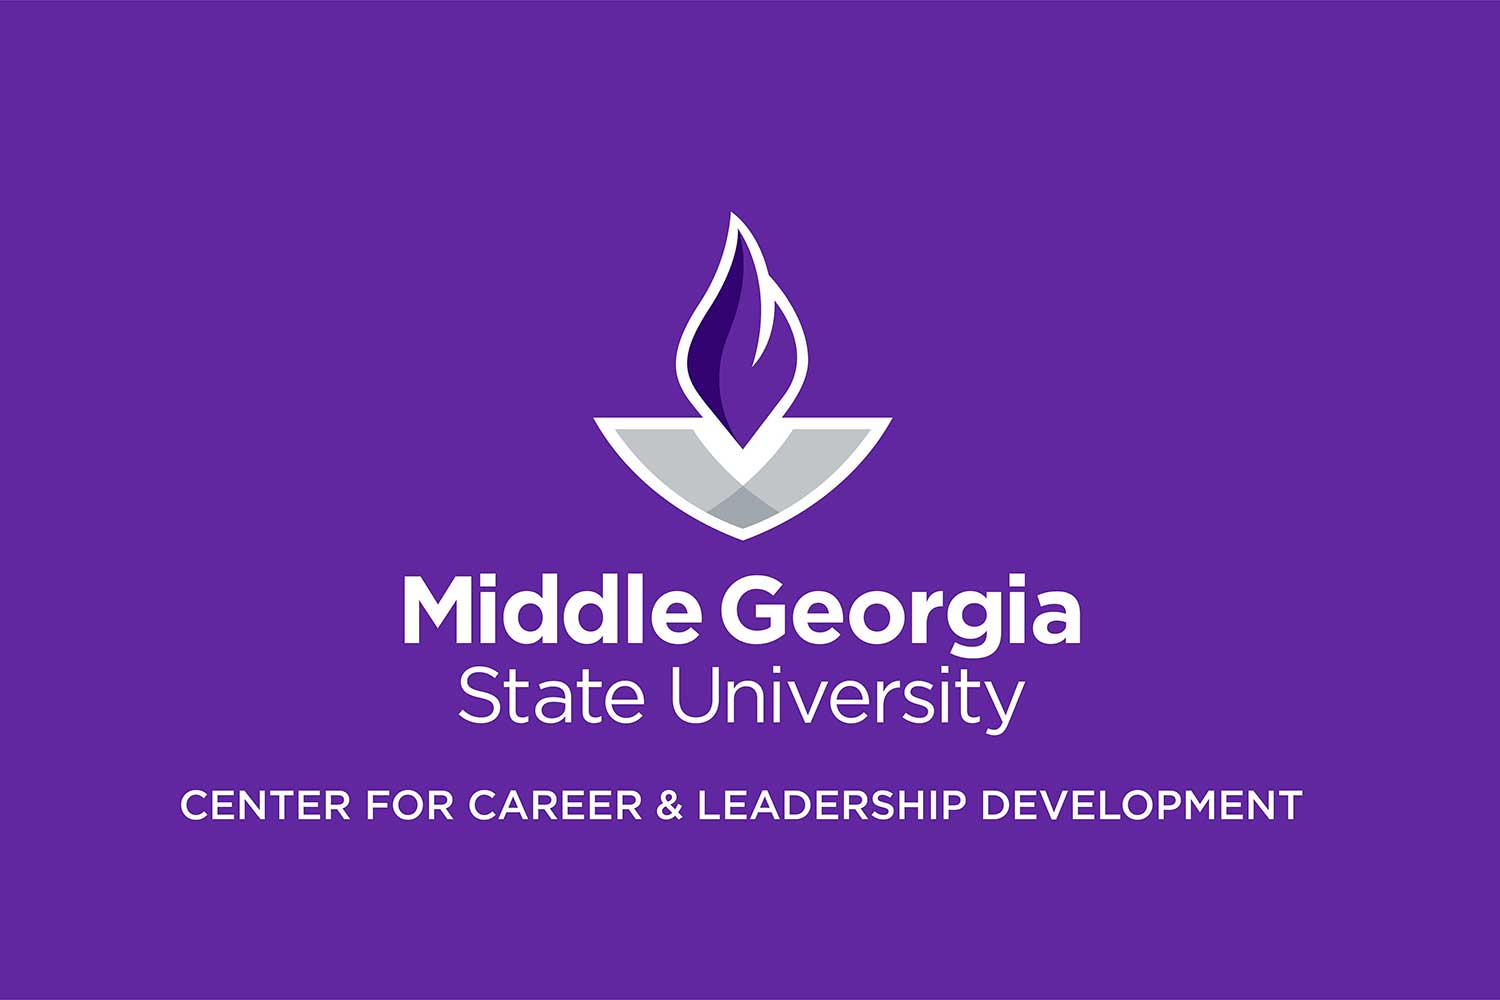 MGA Receives Grant To Grow Student Leadership And Character Development